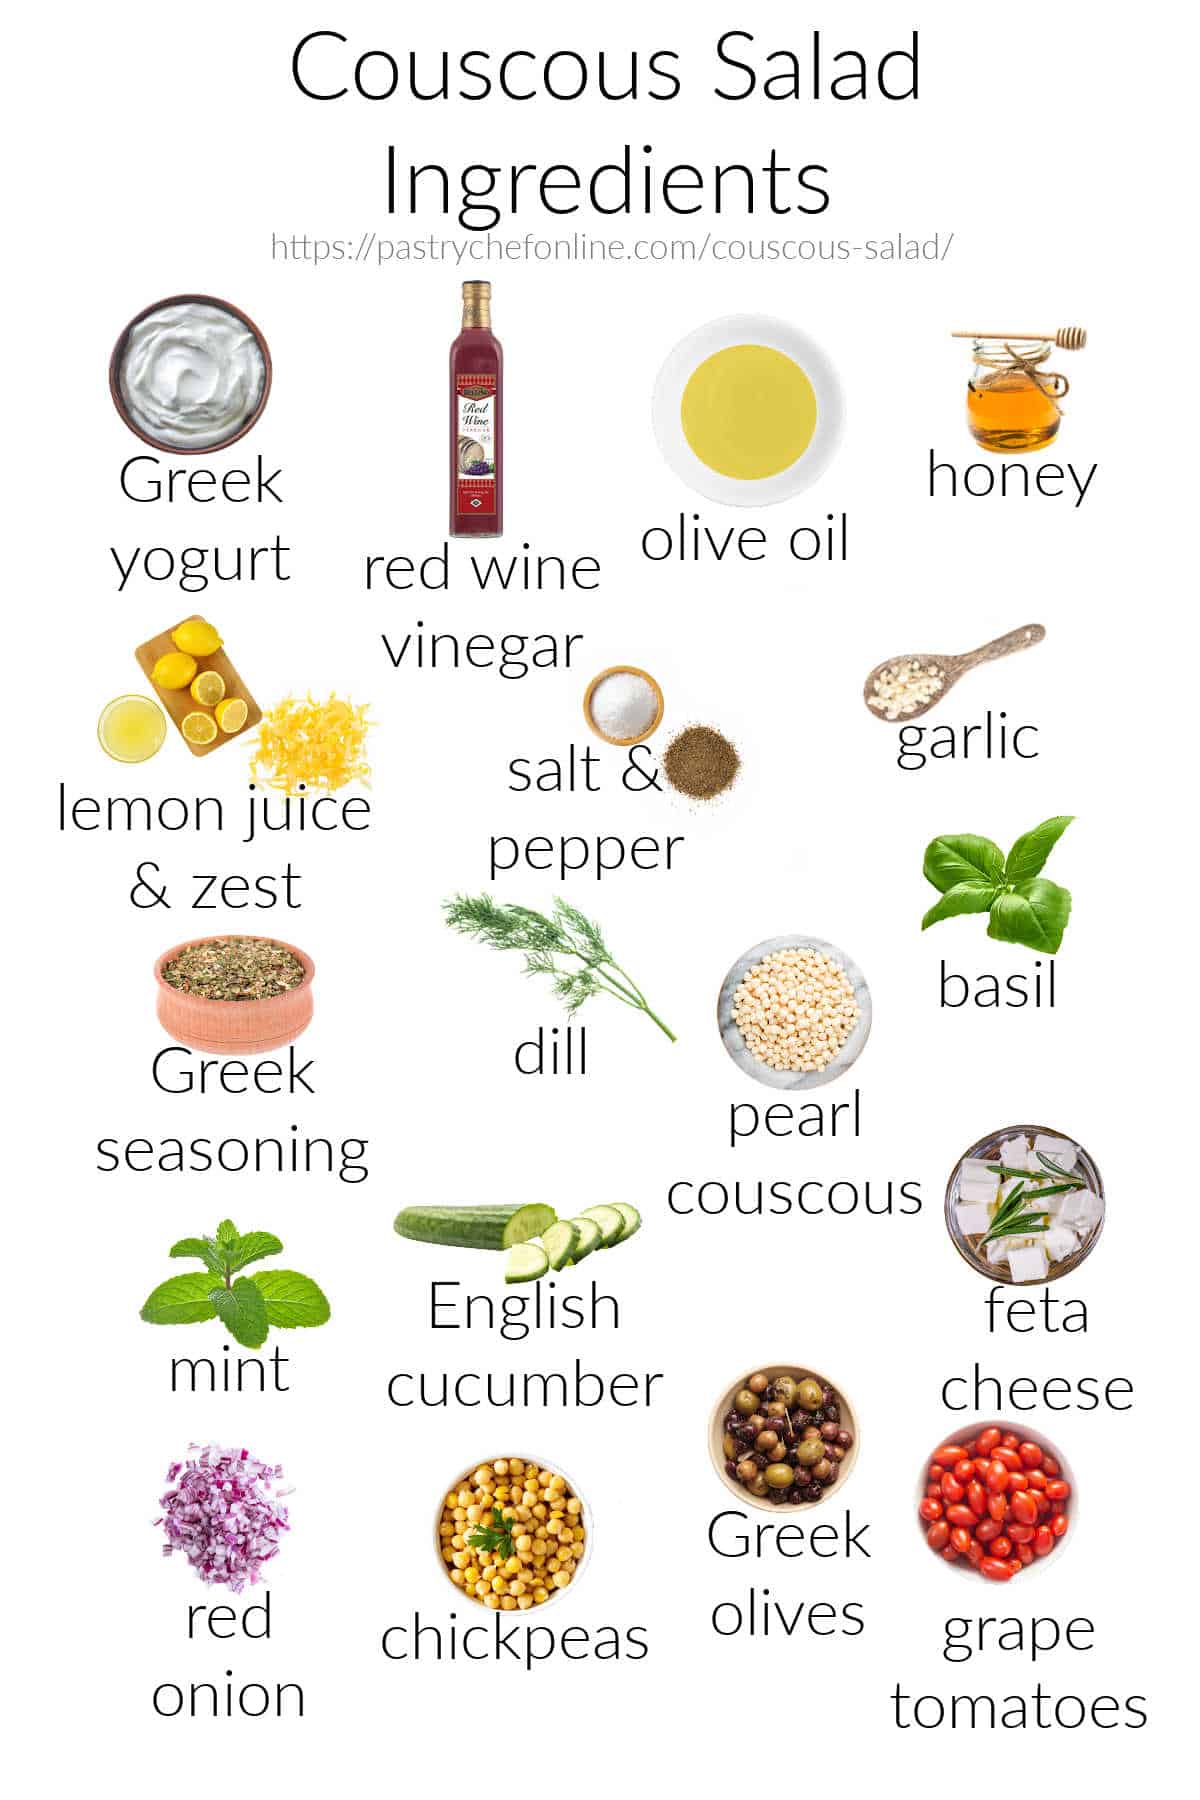 Full color images of all the ingredients needed to make couscous salad, arranged on a white background and labeled in black, sans serif font. Title text reads, "Couscous Salad Ingredients," and the labeled ingredients are Greek yogurt, red wine vinegar, olive oil, honey, lemon juice & zest, salt & pepper, garlic, Greek seasoning, dill, basil, mint, English cucumbers, pearl couscous, feta cheese, red onion, chickpeas, greek olives, and grape tomatoes.